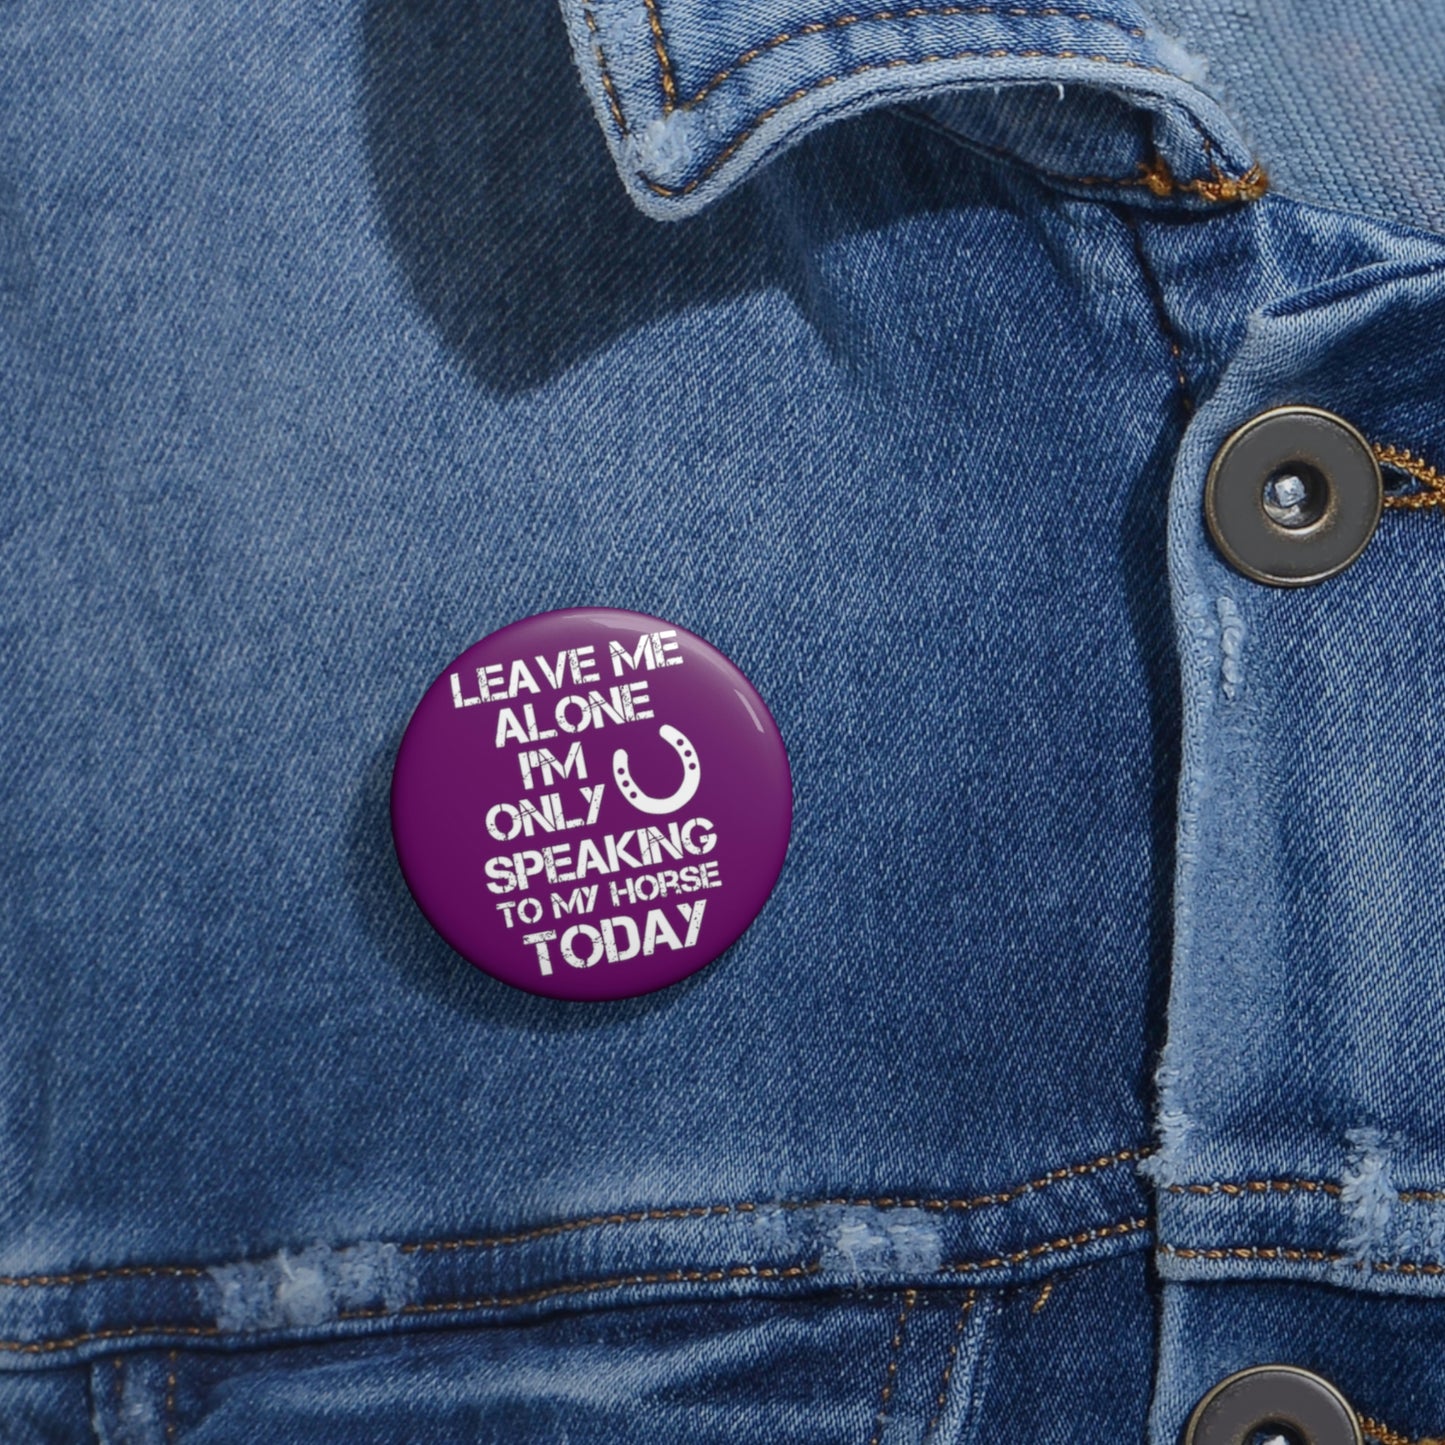 Leave Me Alone - Custom Pin Buttons - Purple / White